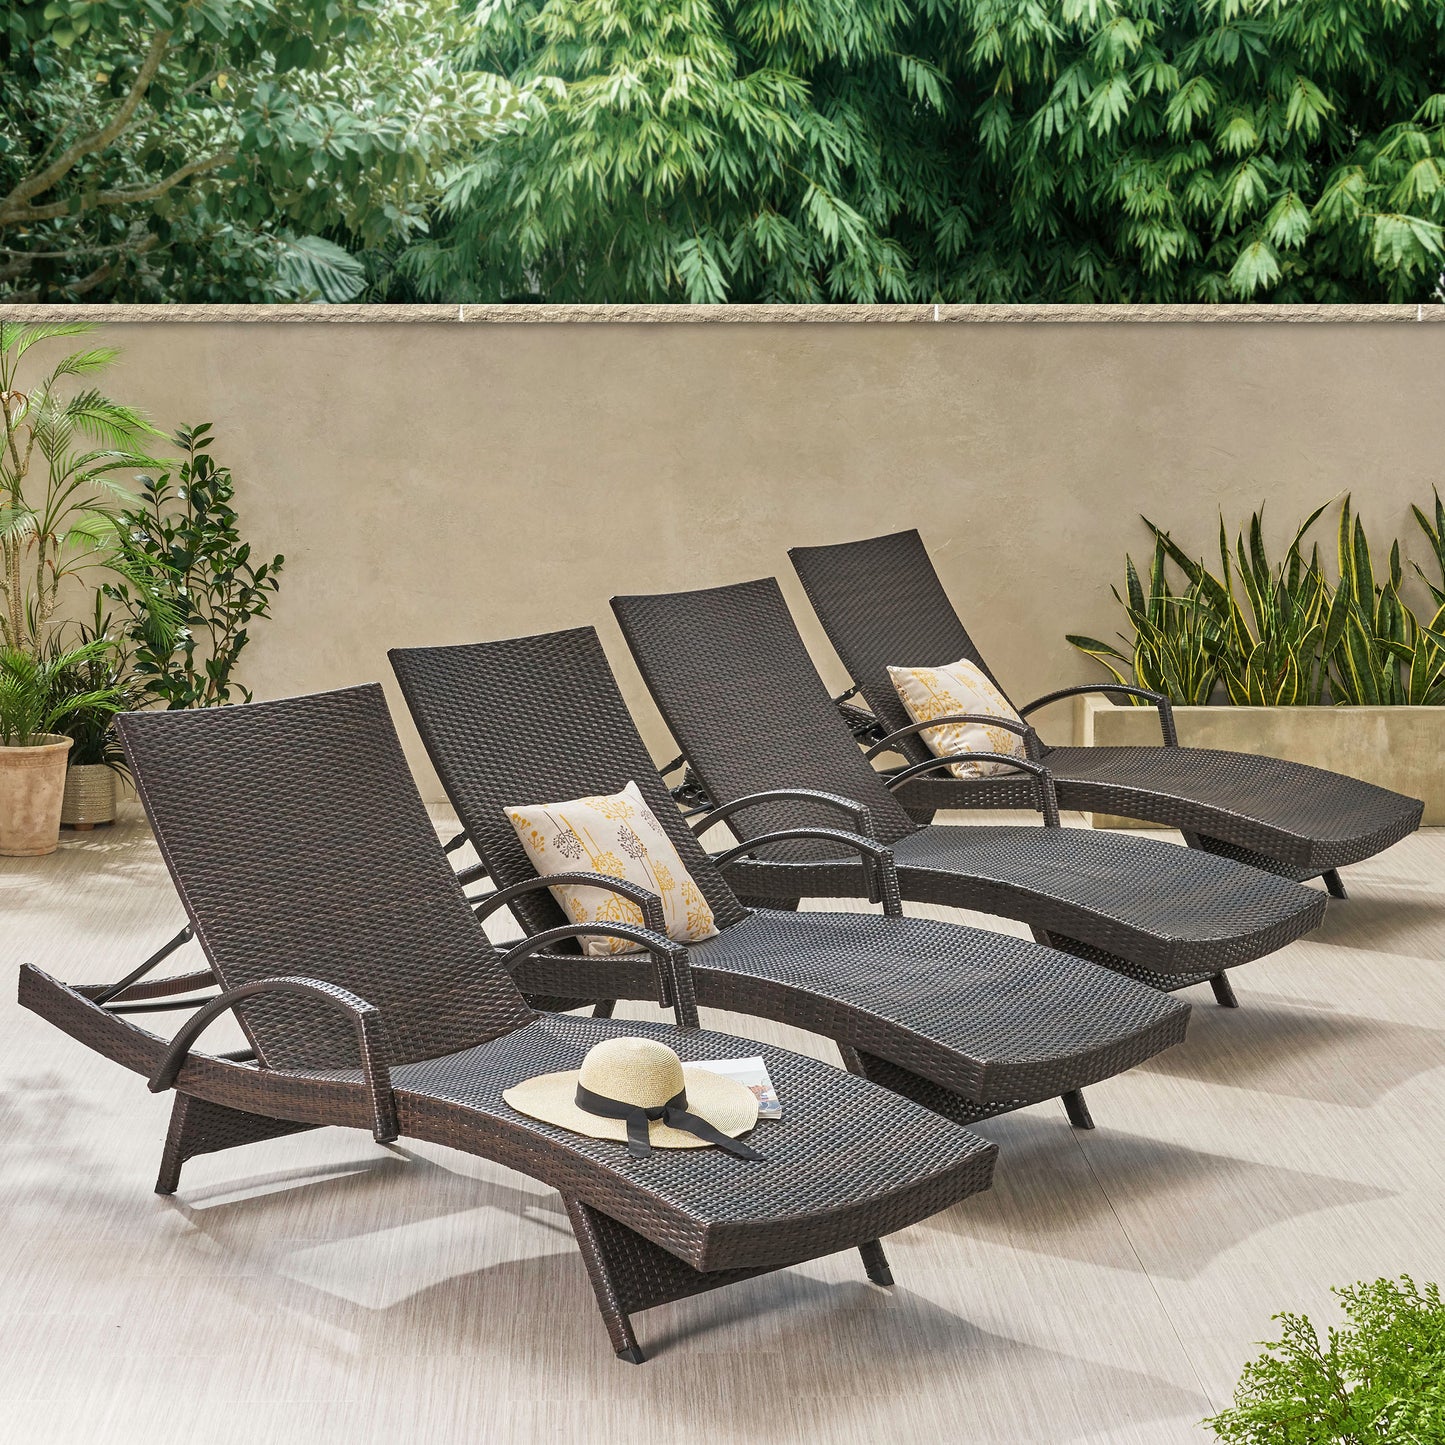 Lakeport Brown Wicker Curved Outdoor Chaise Lounge Chair w/ Arms